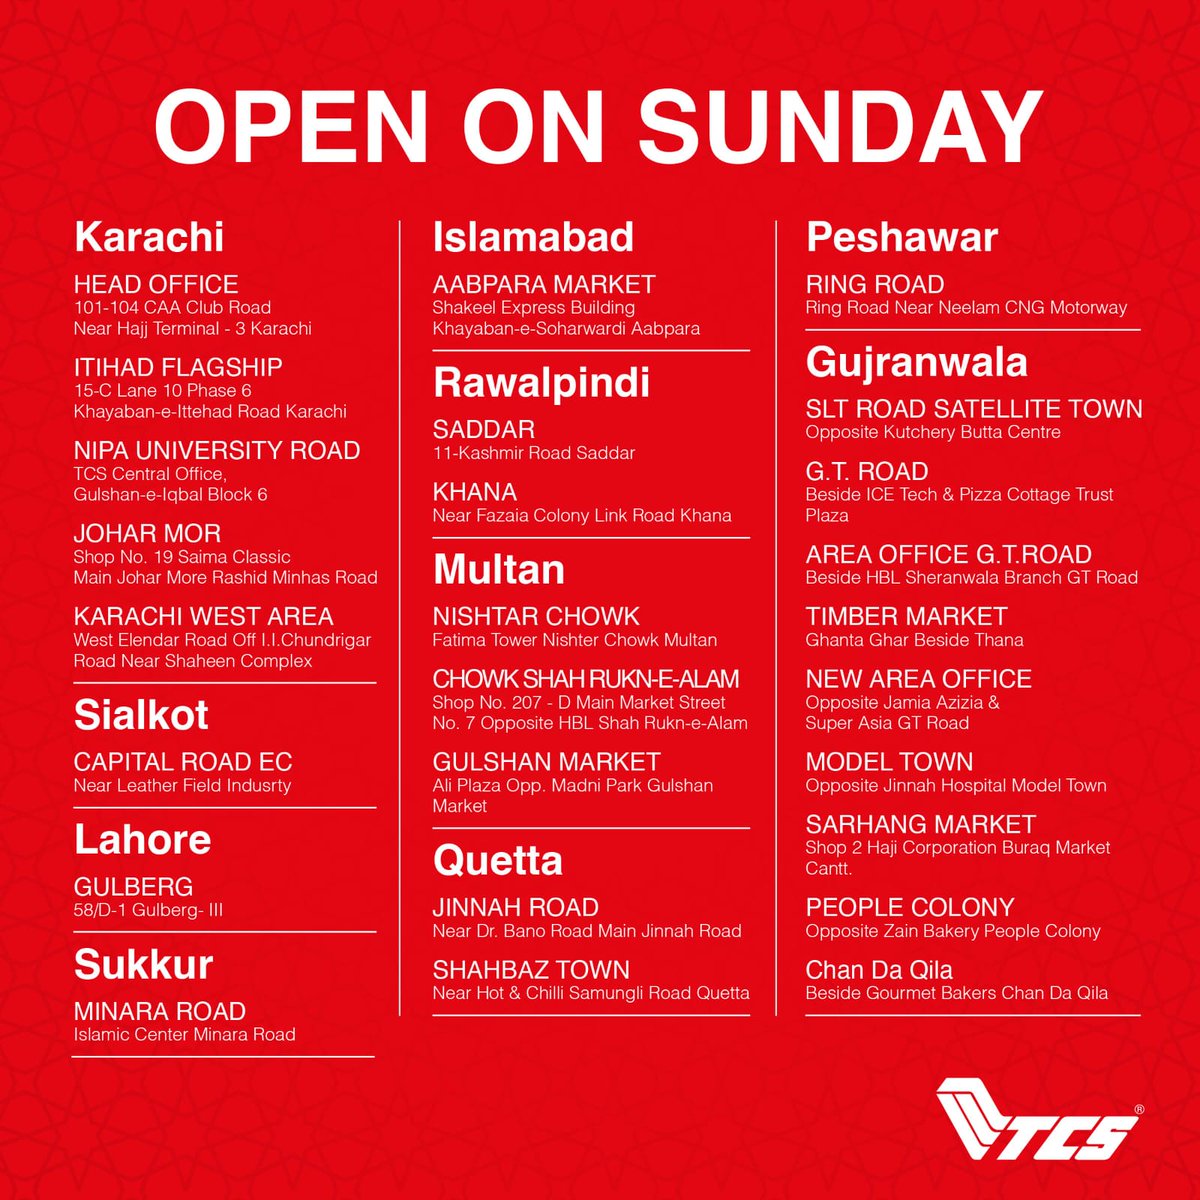 TCS is ensuring maximum convenience for you during Ramzan by keeping designated Express Centres open as per your needs. Visit the link tcsexpress.com/tcs-nearyou to see which one is near! #RamadanBlessings #SpreadTheJoy #TCS #TCSkardo #eid